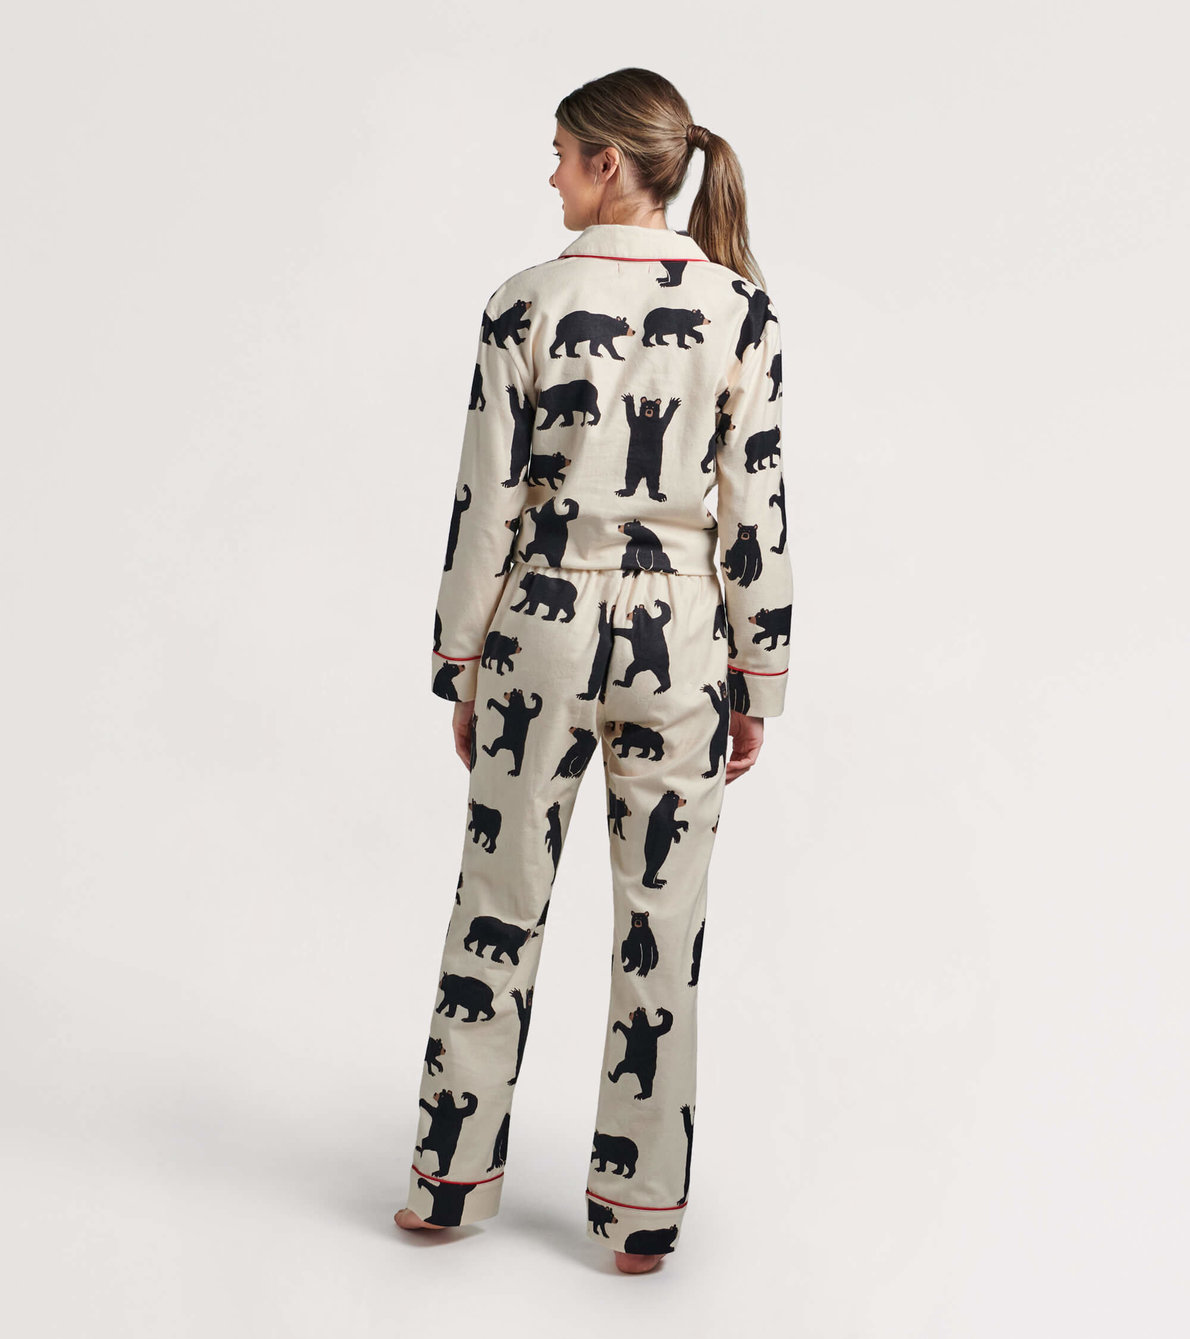 View larger image of Black Bears Women's Flannel Pajama Set